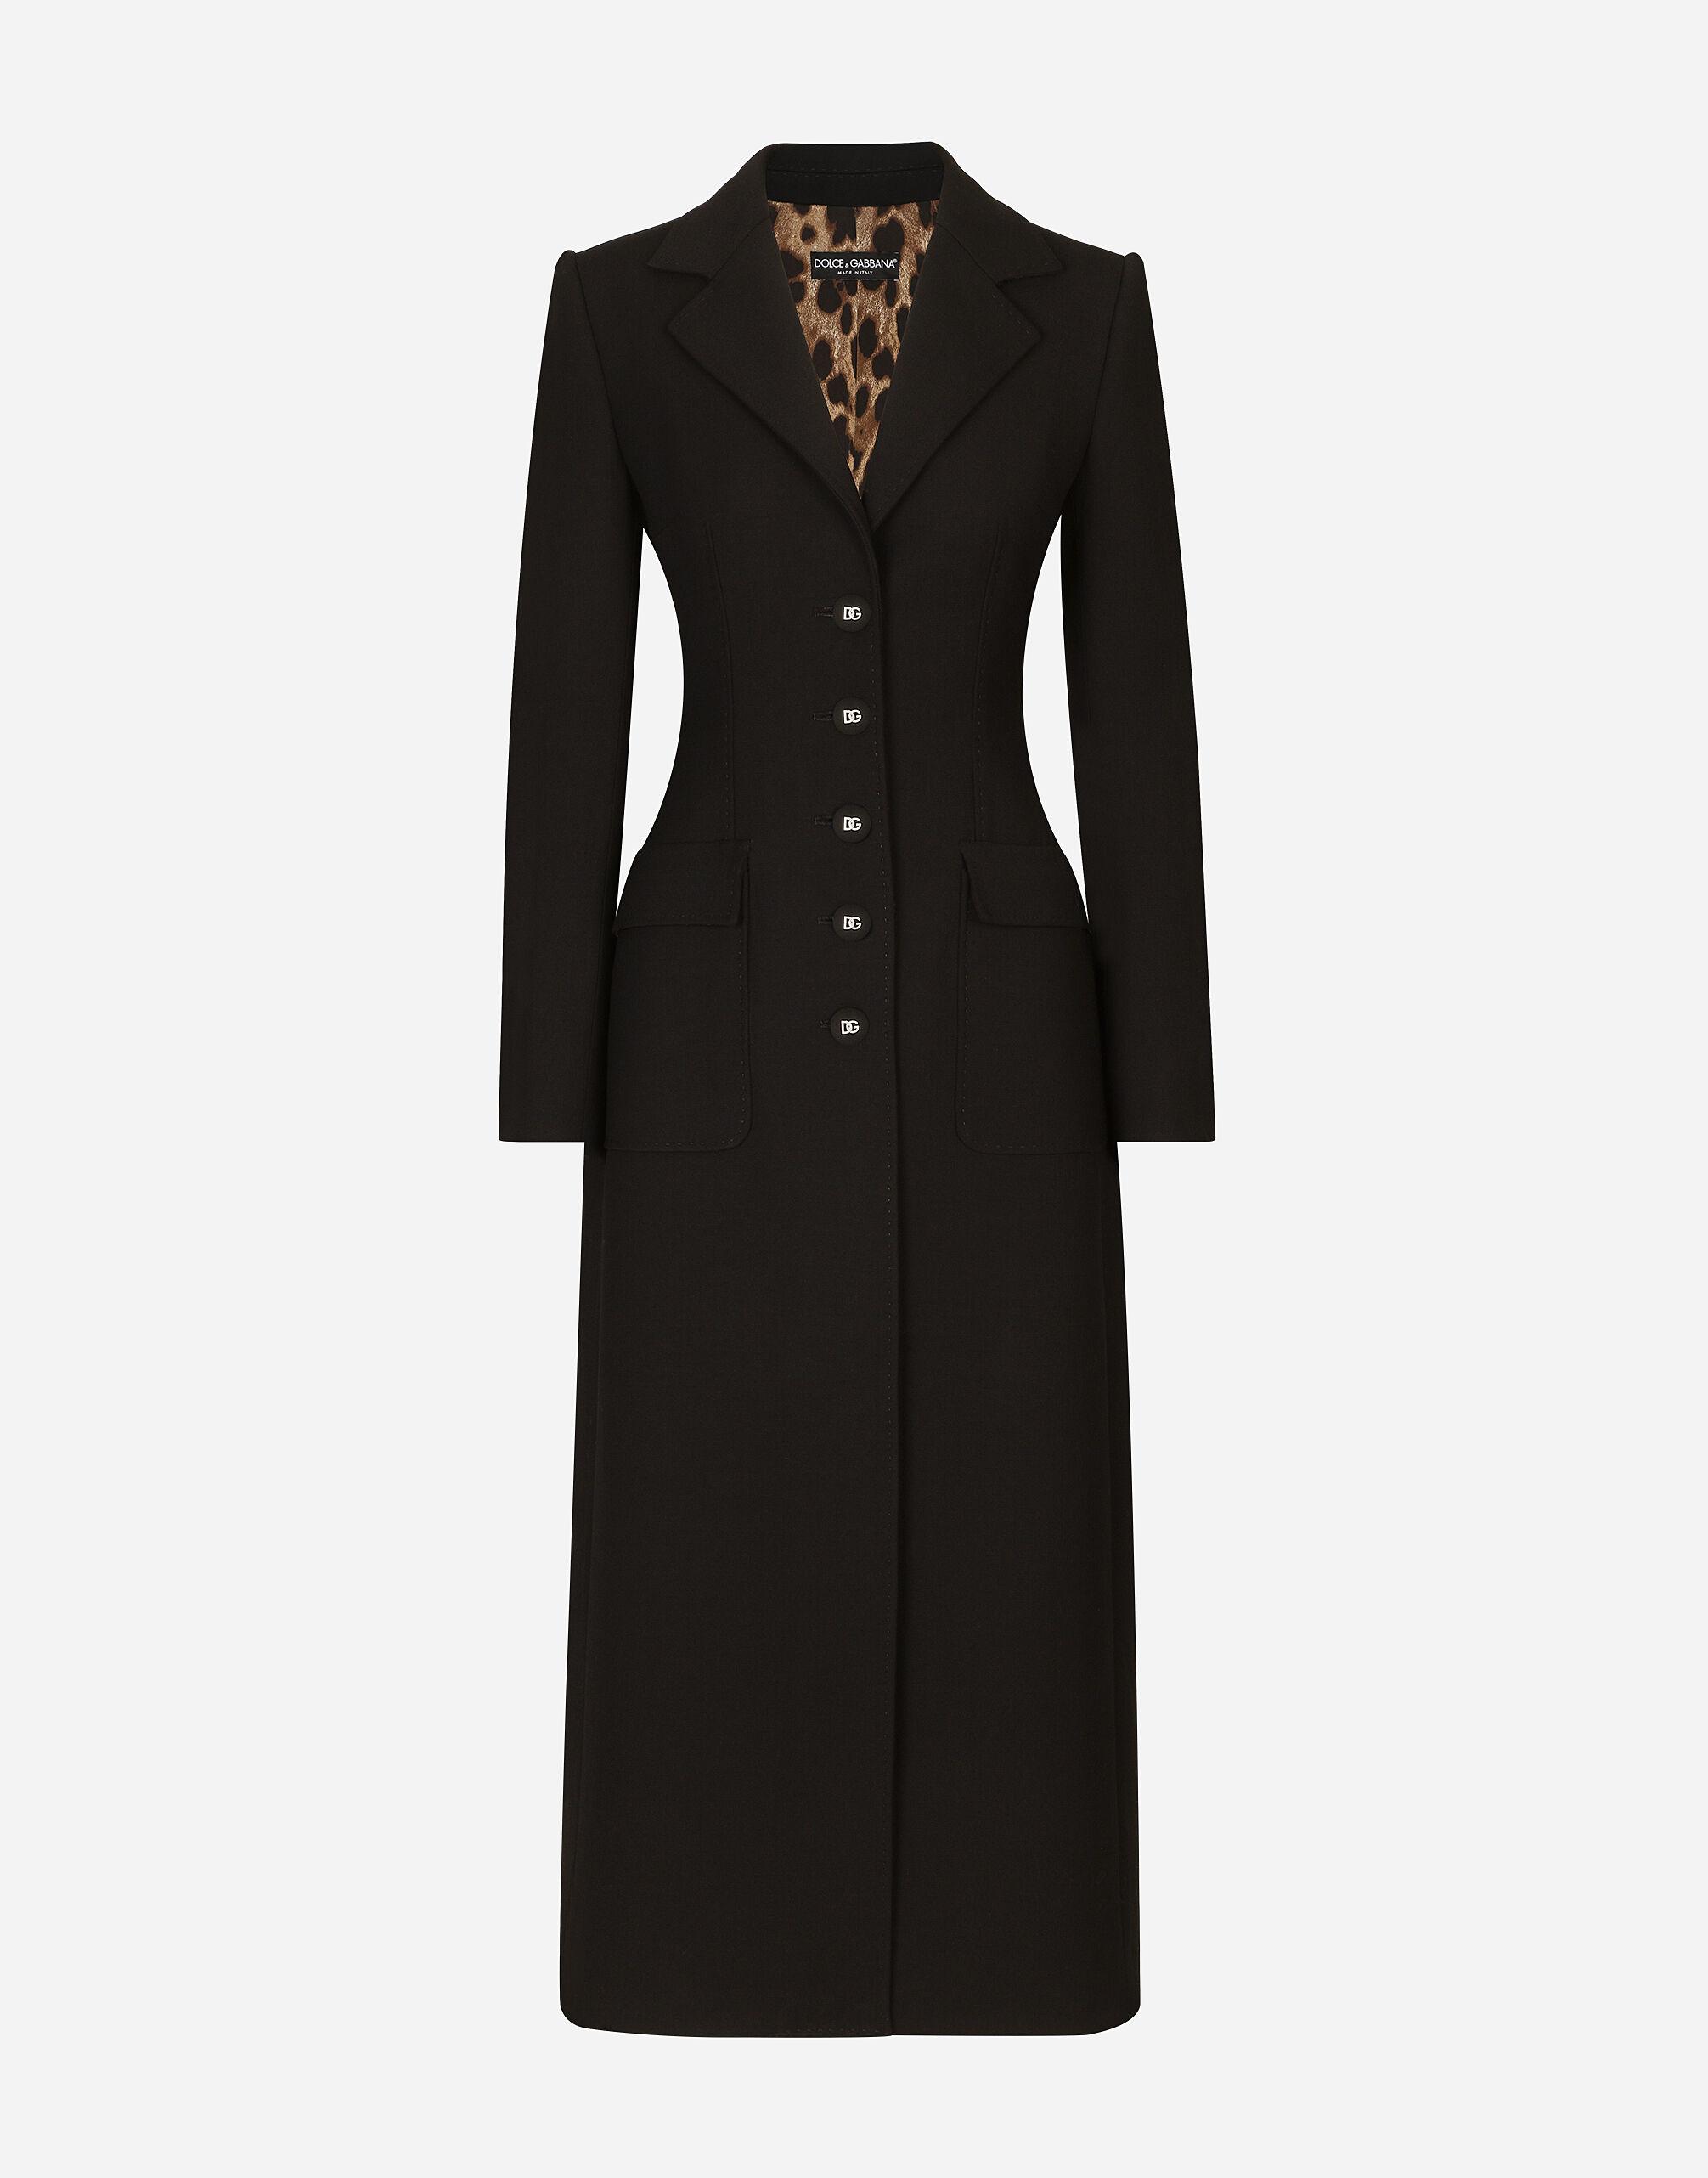 Dolce & Gabbana Single-breasted Double Crepe Coat in Black | Lyst